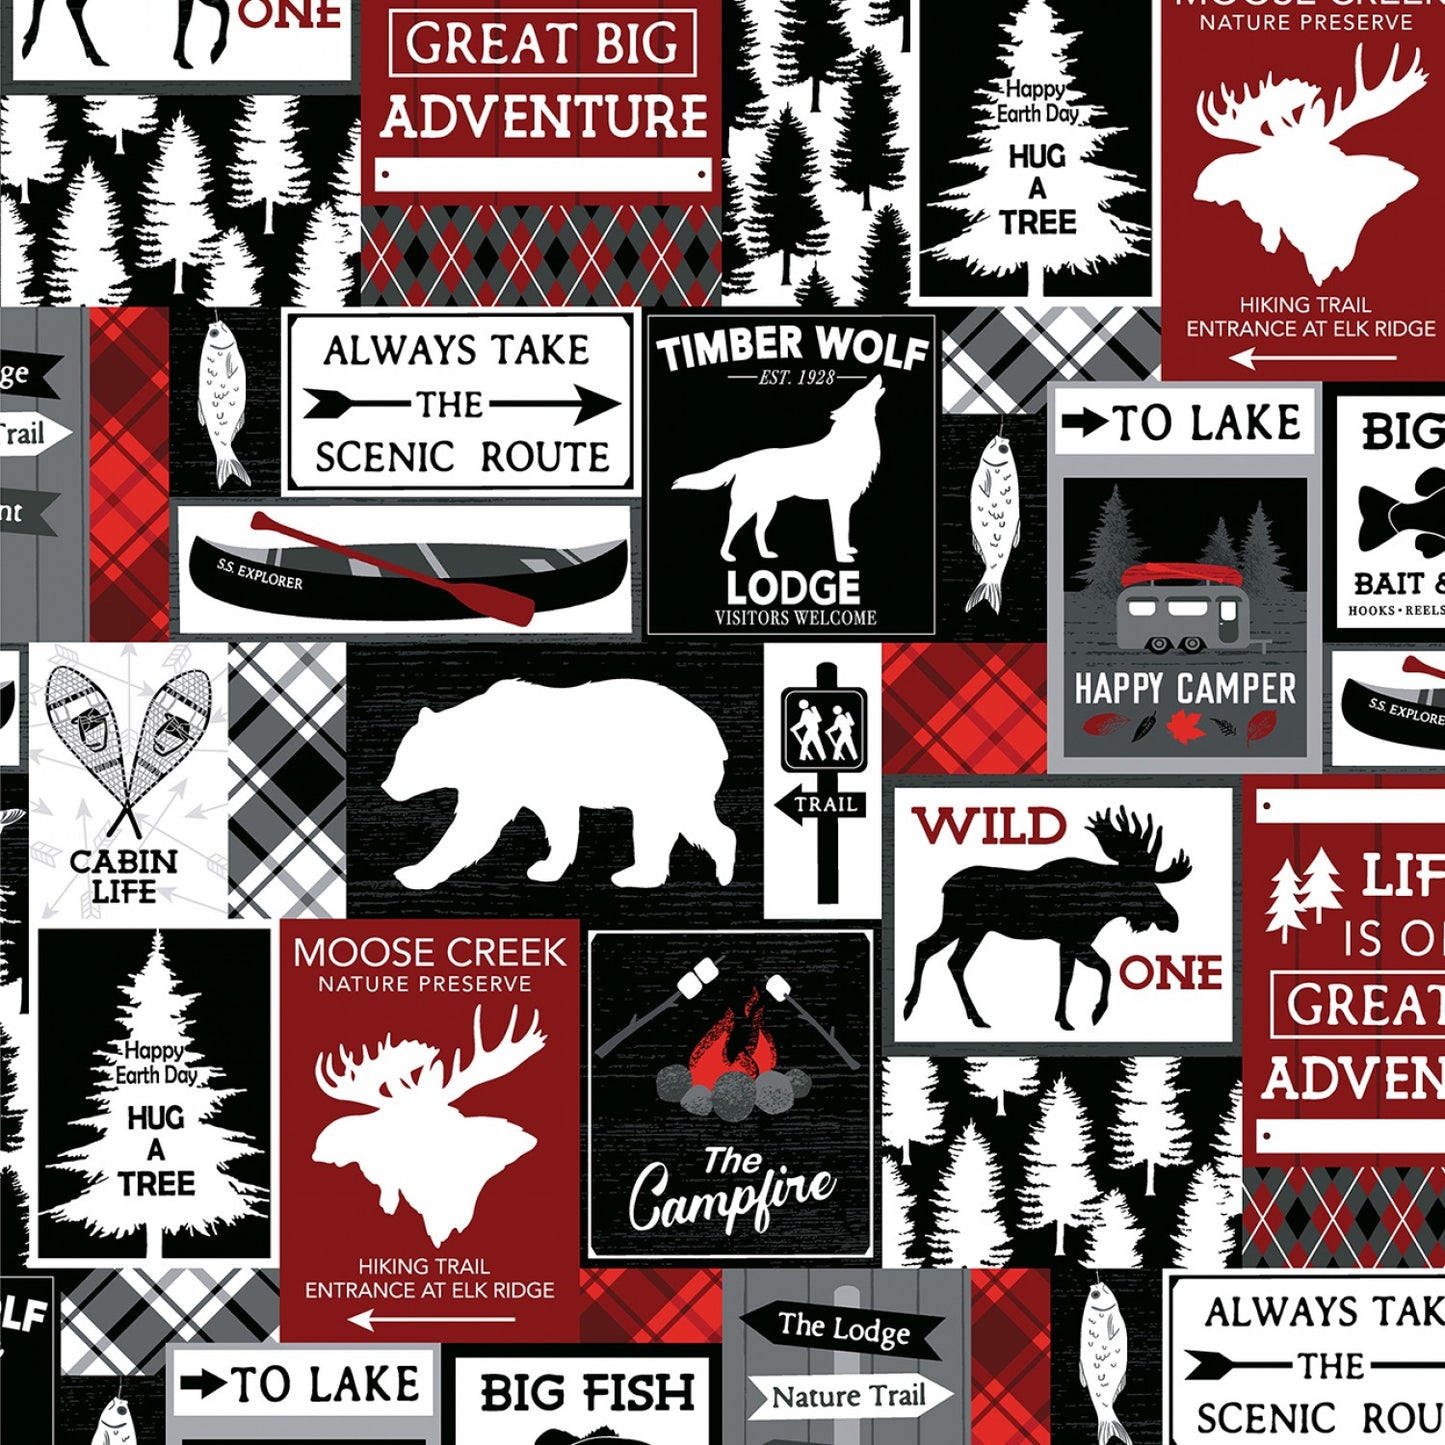 Great Outdoors Cabin Life Red/Black    12935B-99 Cotton Woven Fabric